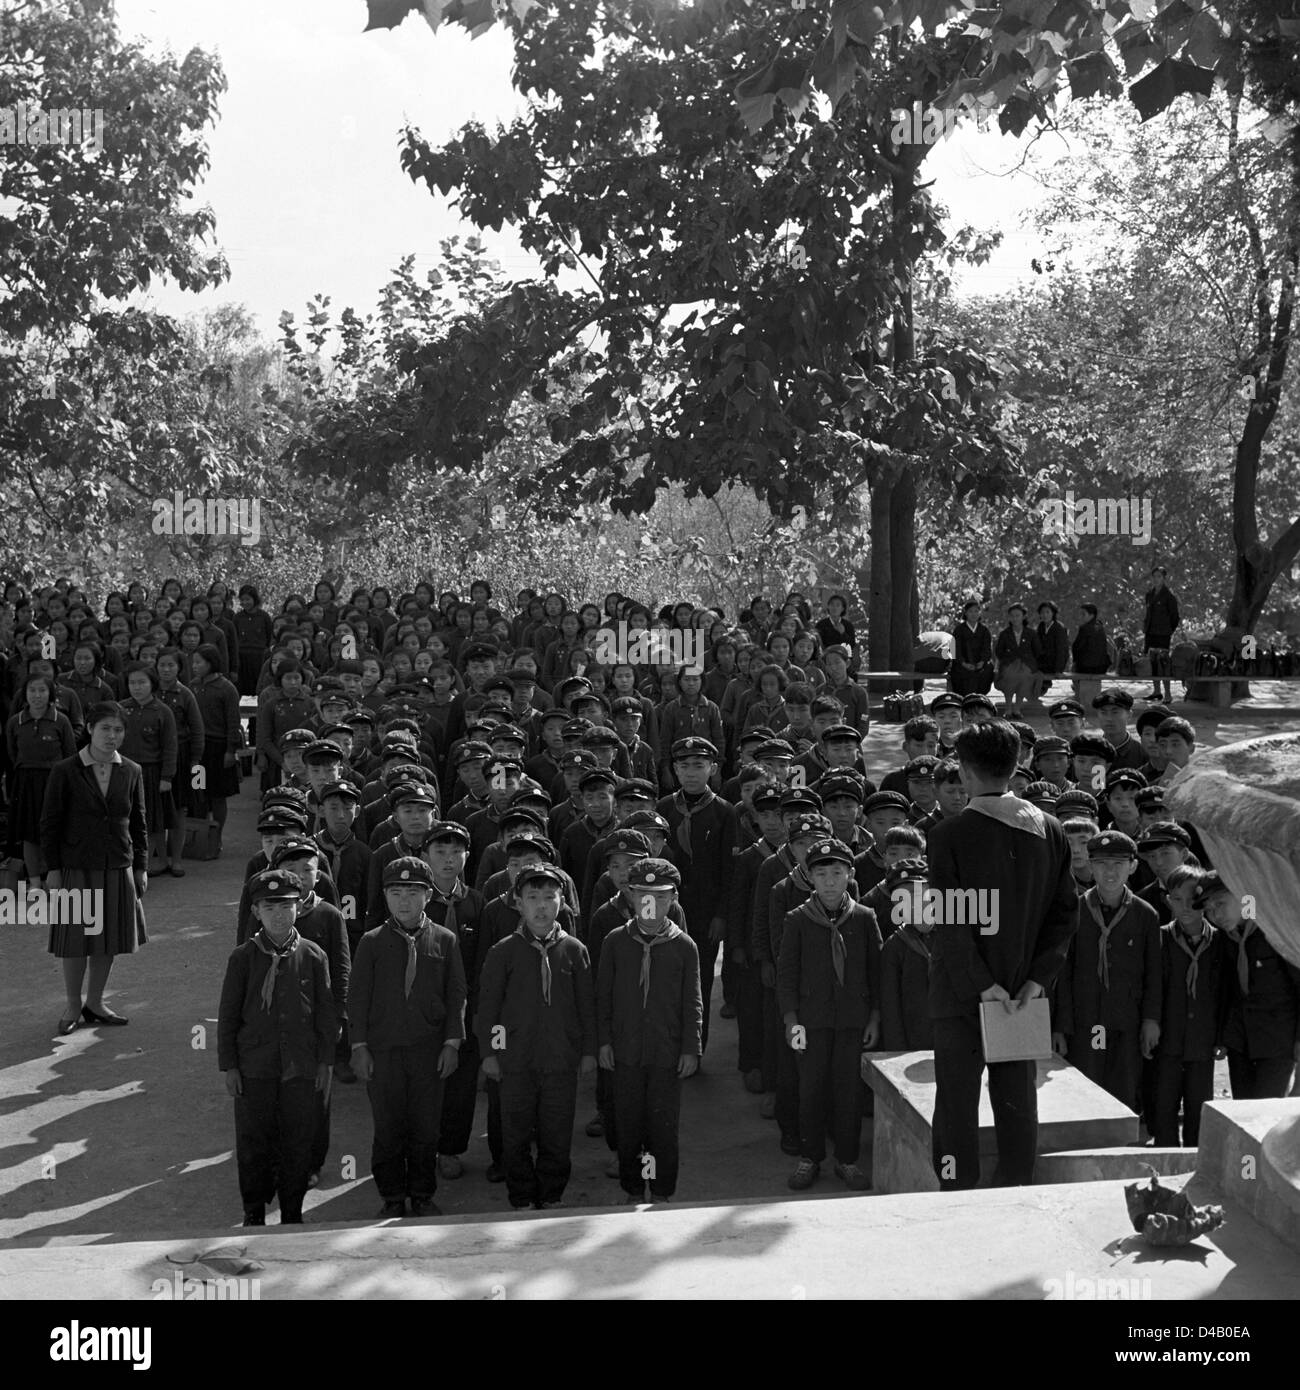 North Korean pioneers in uniform stand in marching order in front of the entrance to the Sinchon museum concerning US war crimes, photographed on the 4th of November in 1971.    Photo: ddrbildarchiv.de / Klaus Morgenstern - GESPERRT FÜR BILDFUNK Stock Photo